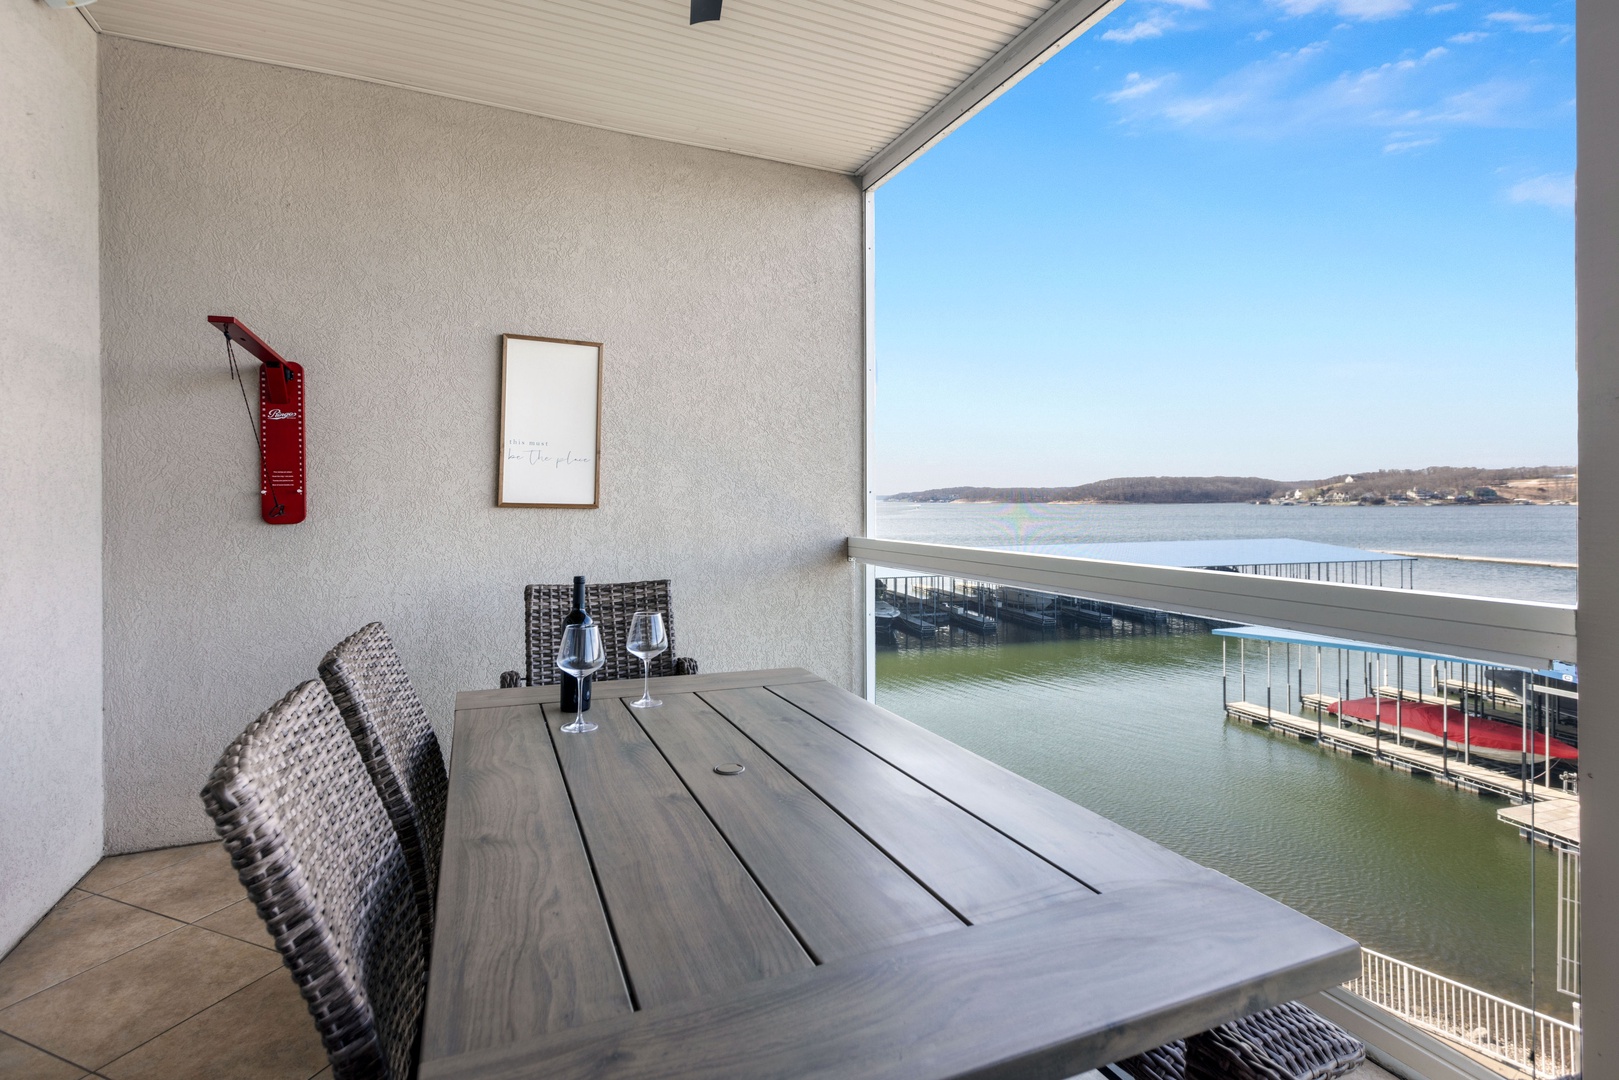 Dine al fresco with stunning lake views on the deck